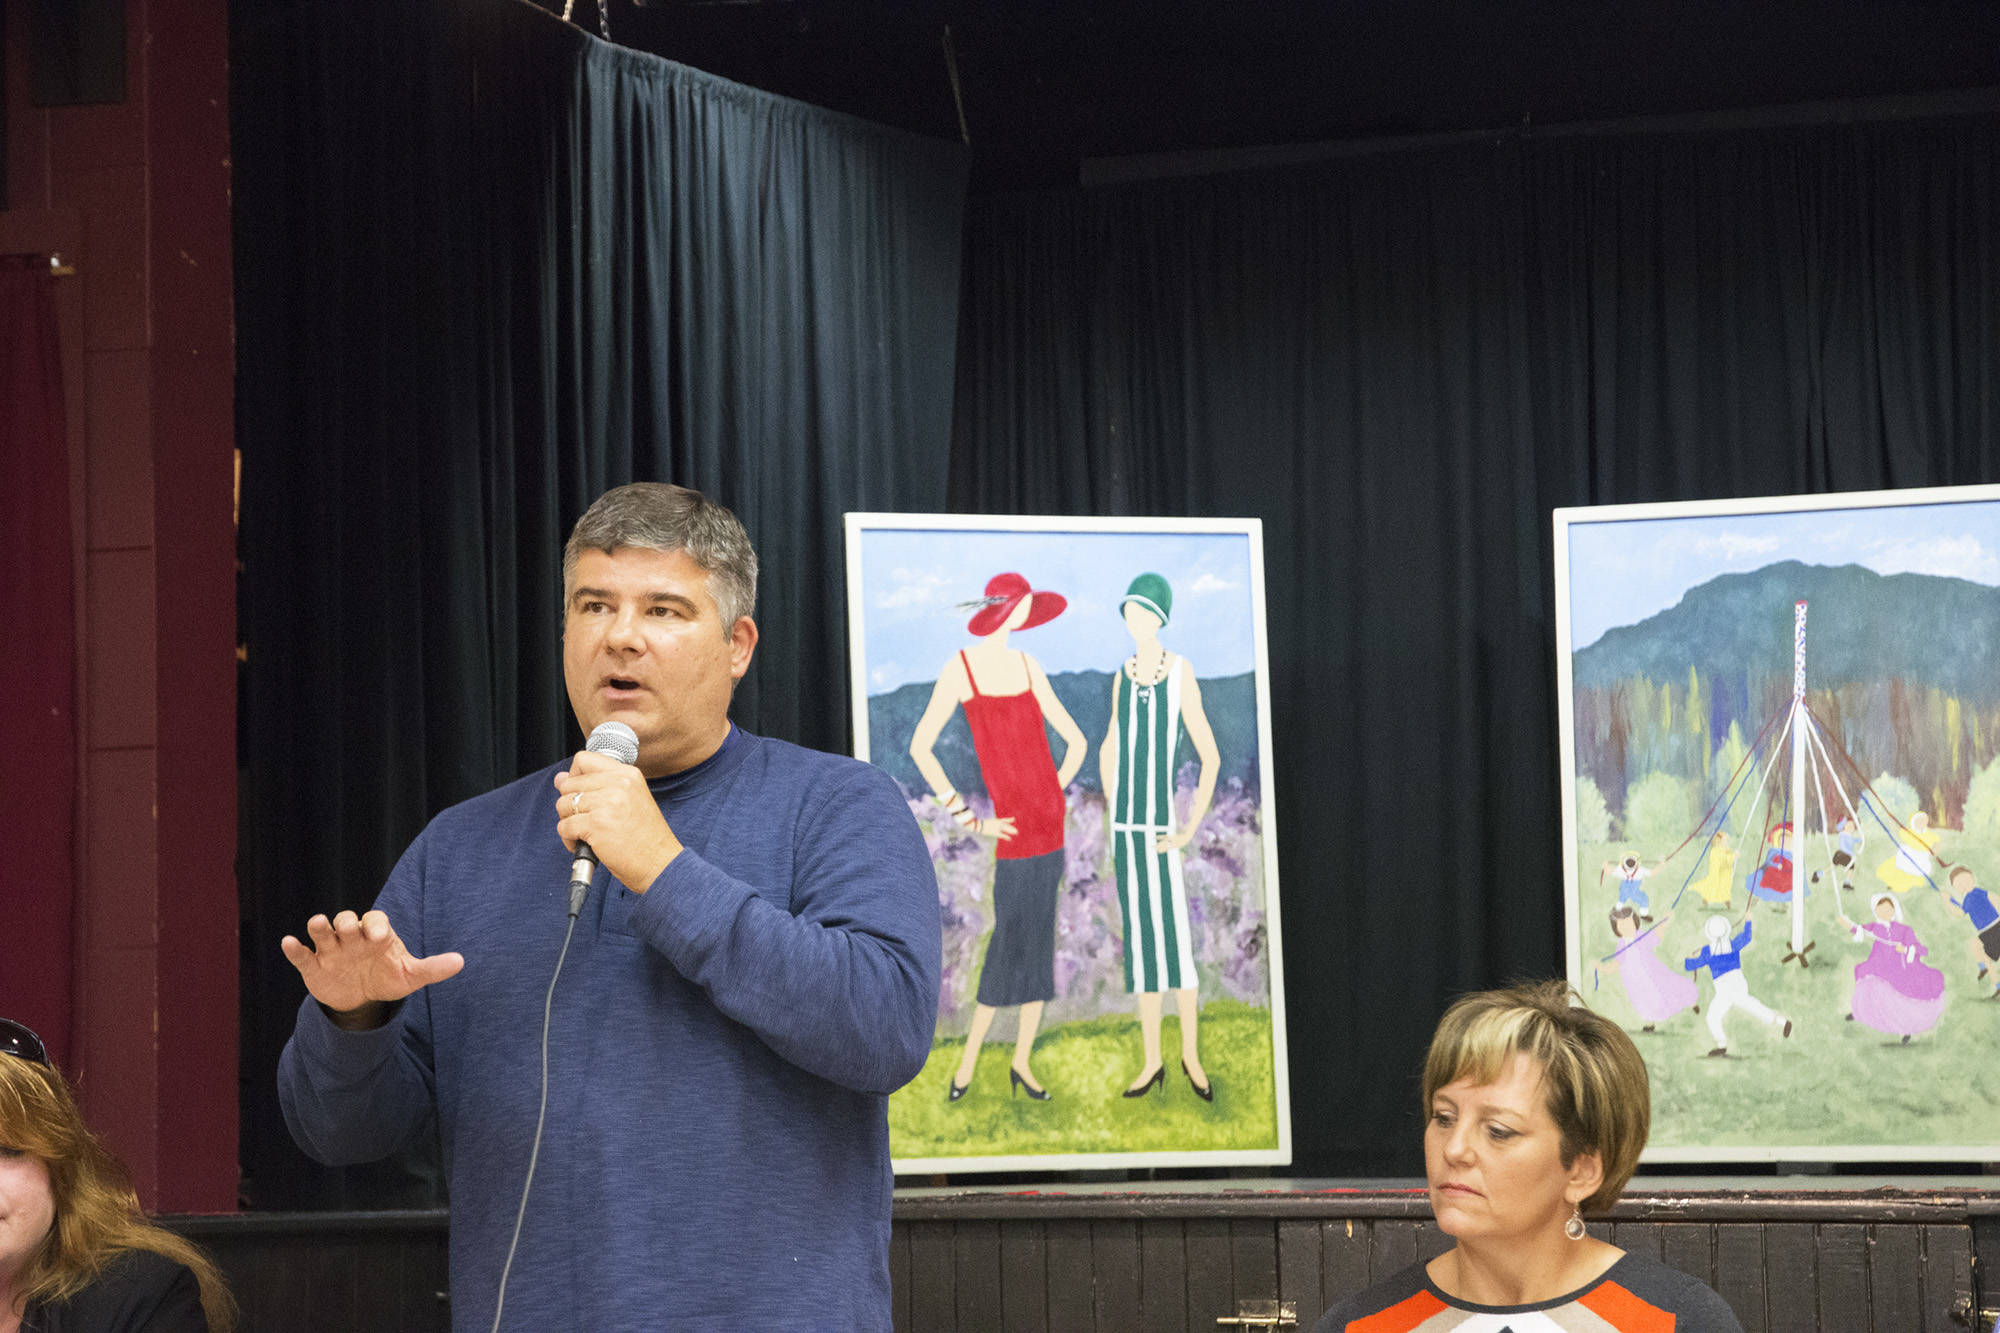 13851618_web1_20181004-SAA-Sicamous-All-Candidates-forum-JE-013